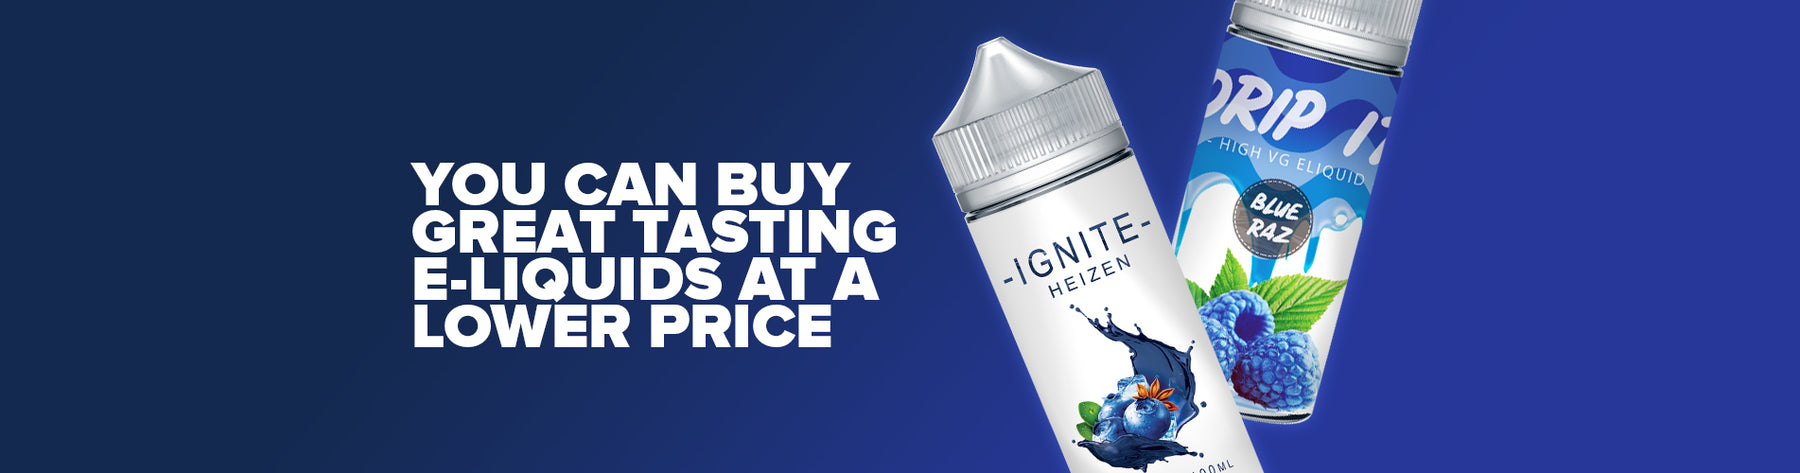 Affordable E-liquid Products: You Can Buy Great-tasting E-liquid At A Lower Price